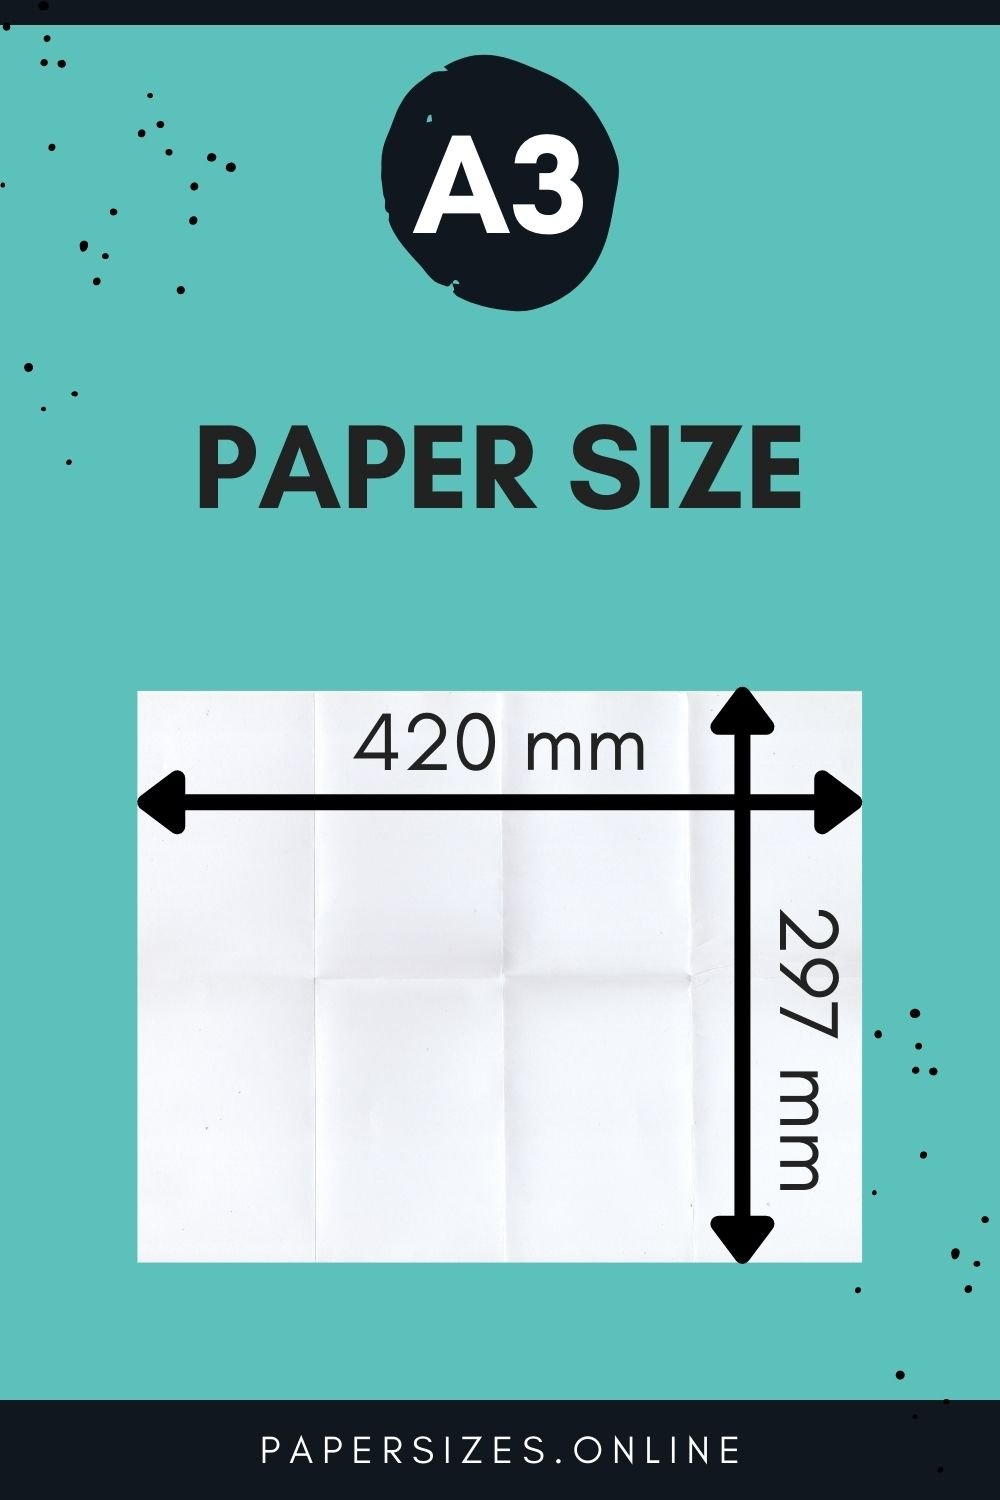 Boomgaard Matrix Uitbarsten A3 Paper Size And Dimensions - Paper Sizes Online